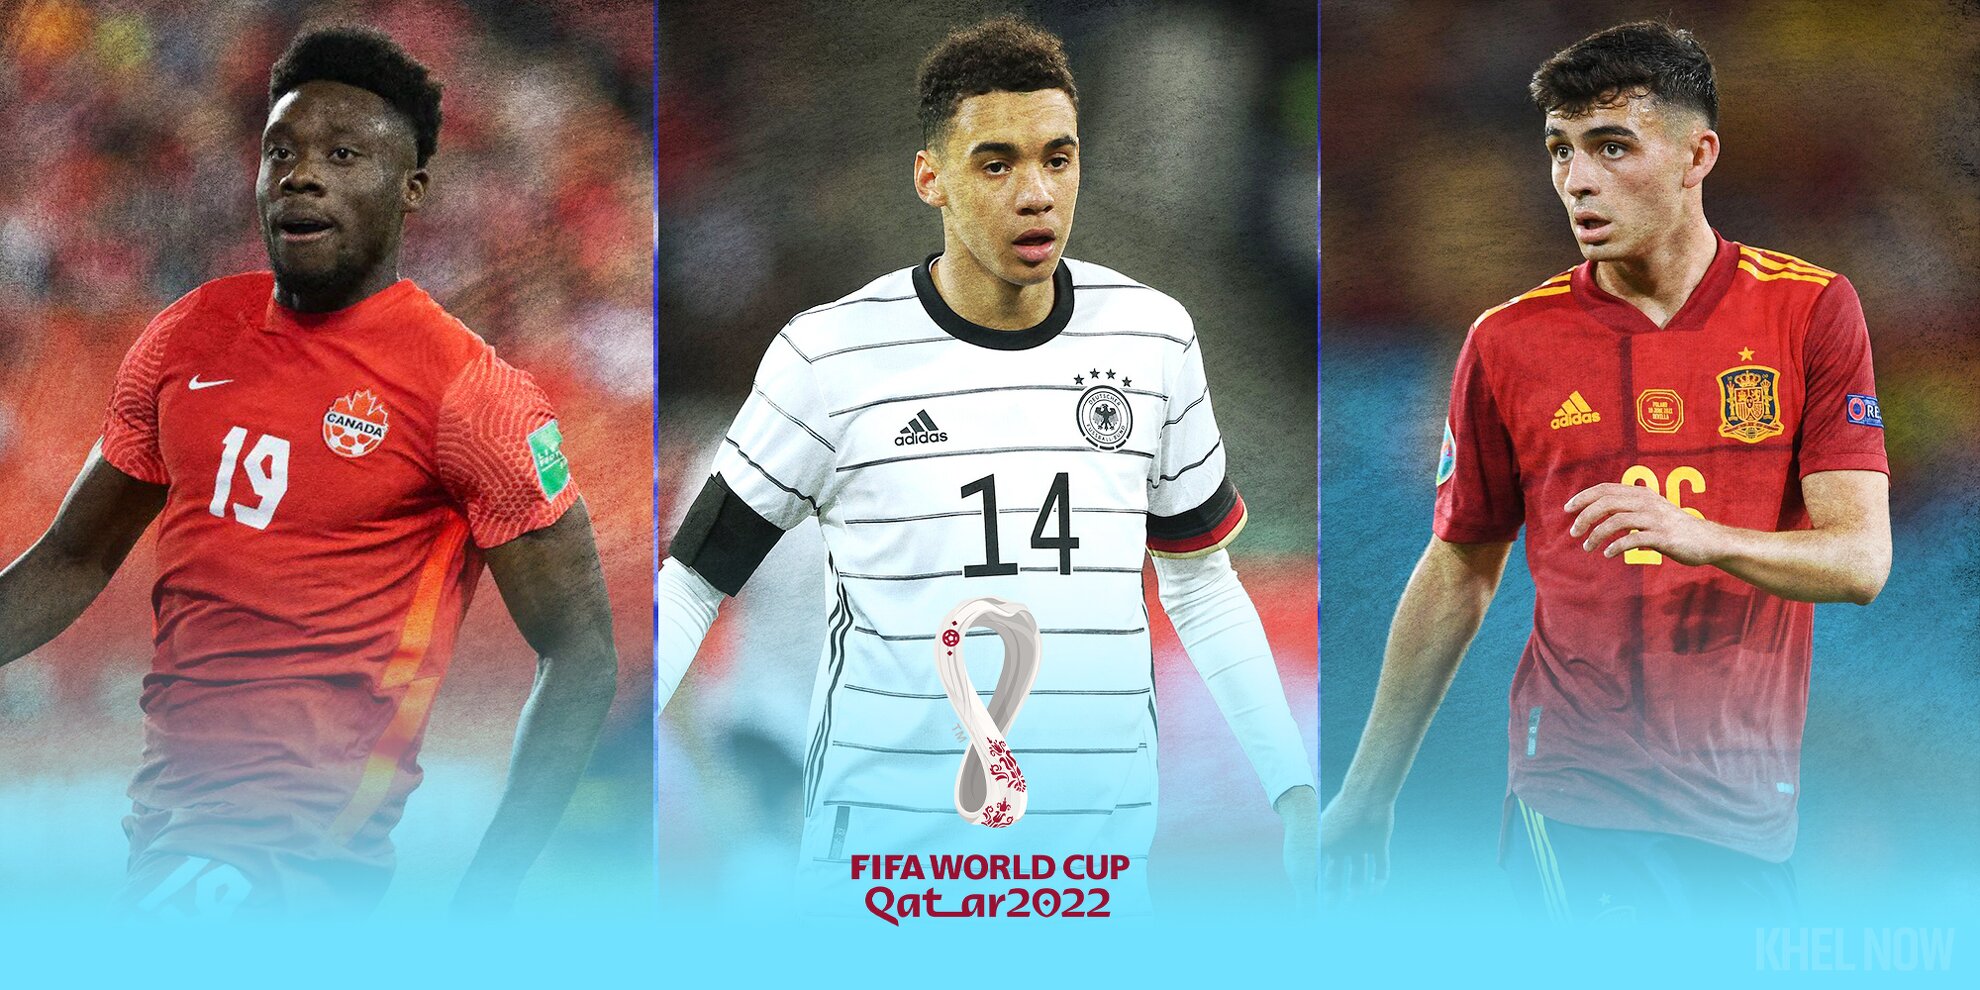 Ranking the top 10 favourites to win best young player award at 2022 FIFA World Cup